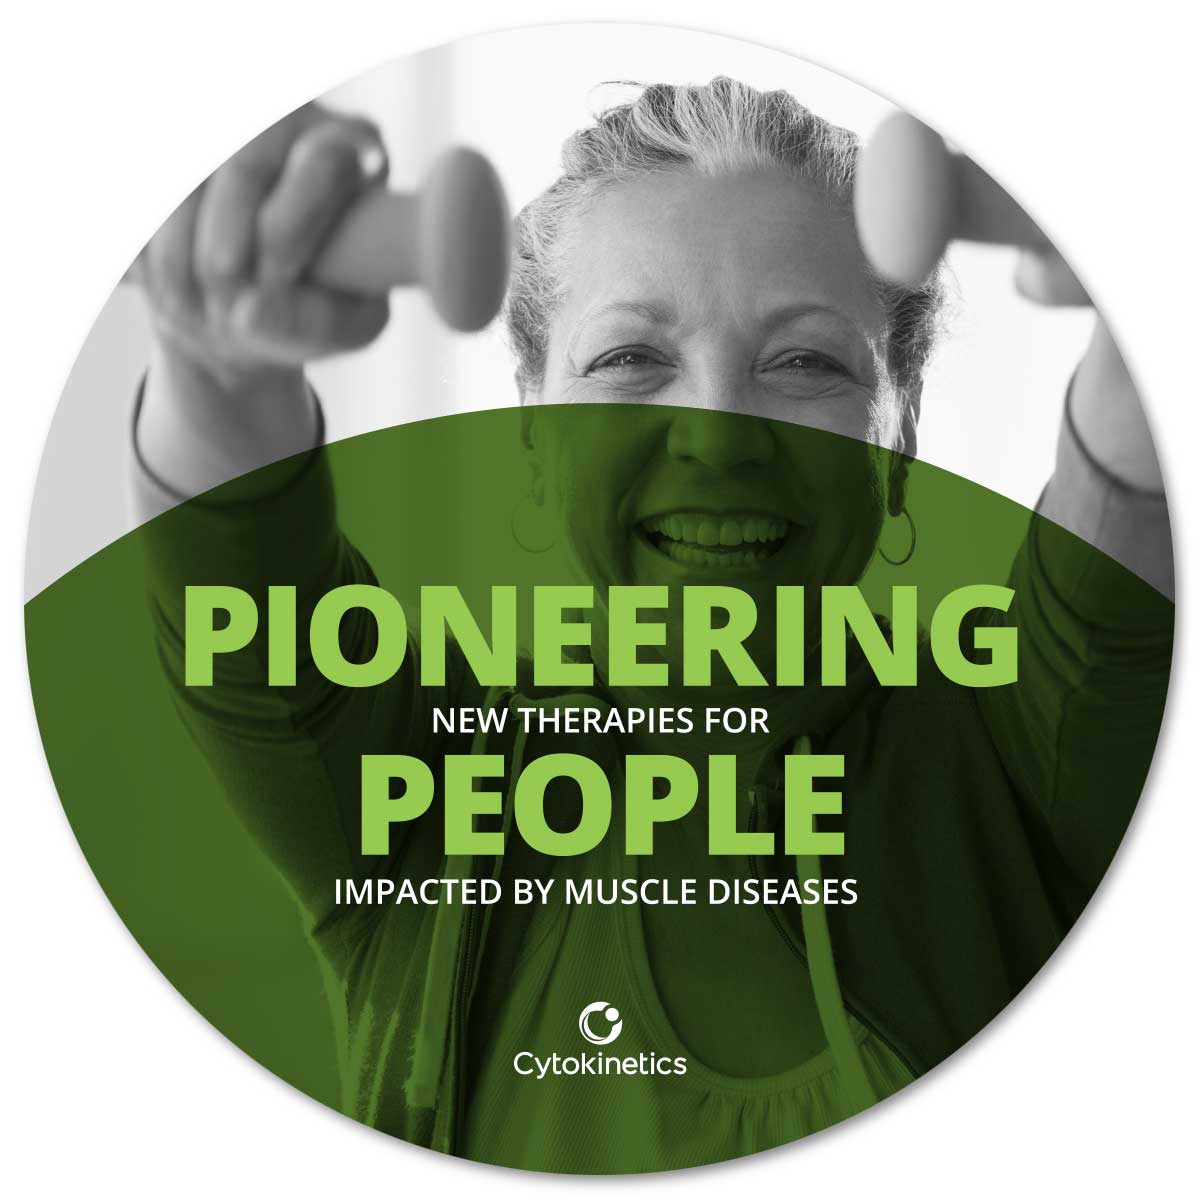 Poster in shape of a circle with headline 'Pioneering new therapies for people impacted by muscle diseases.'